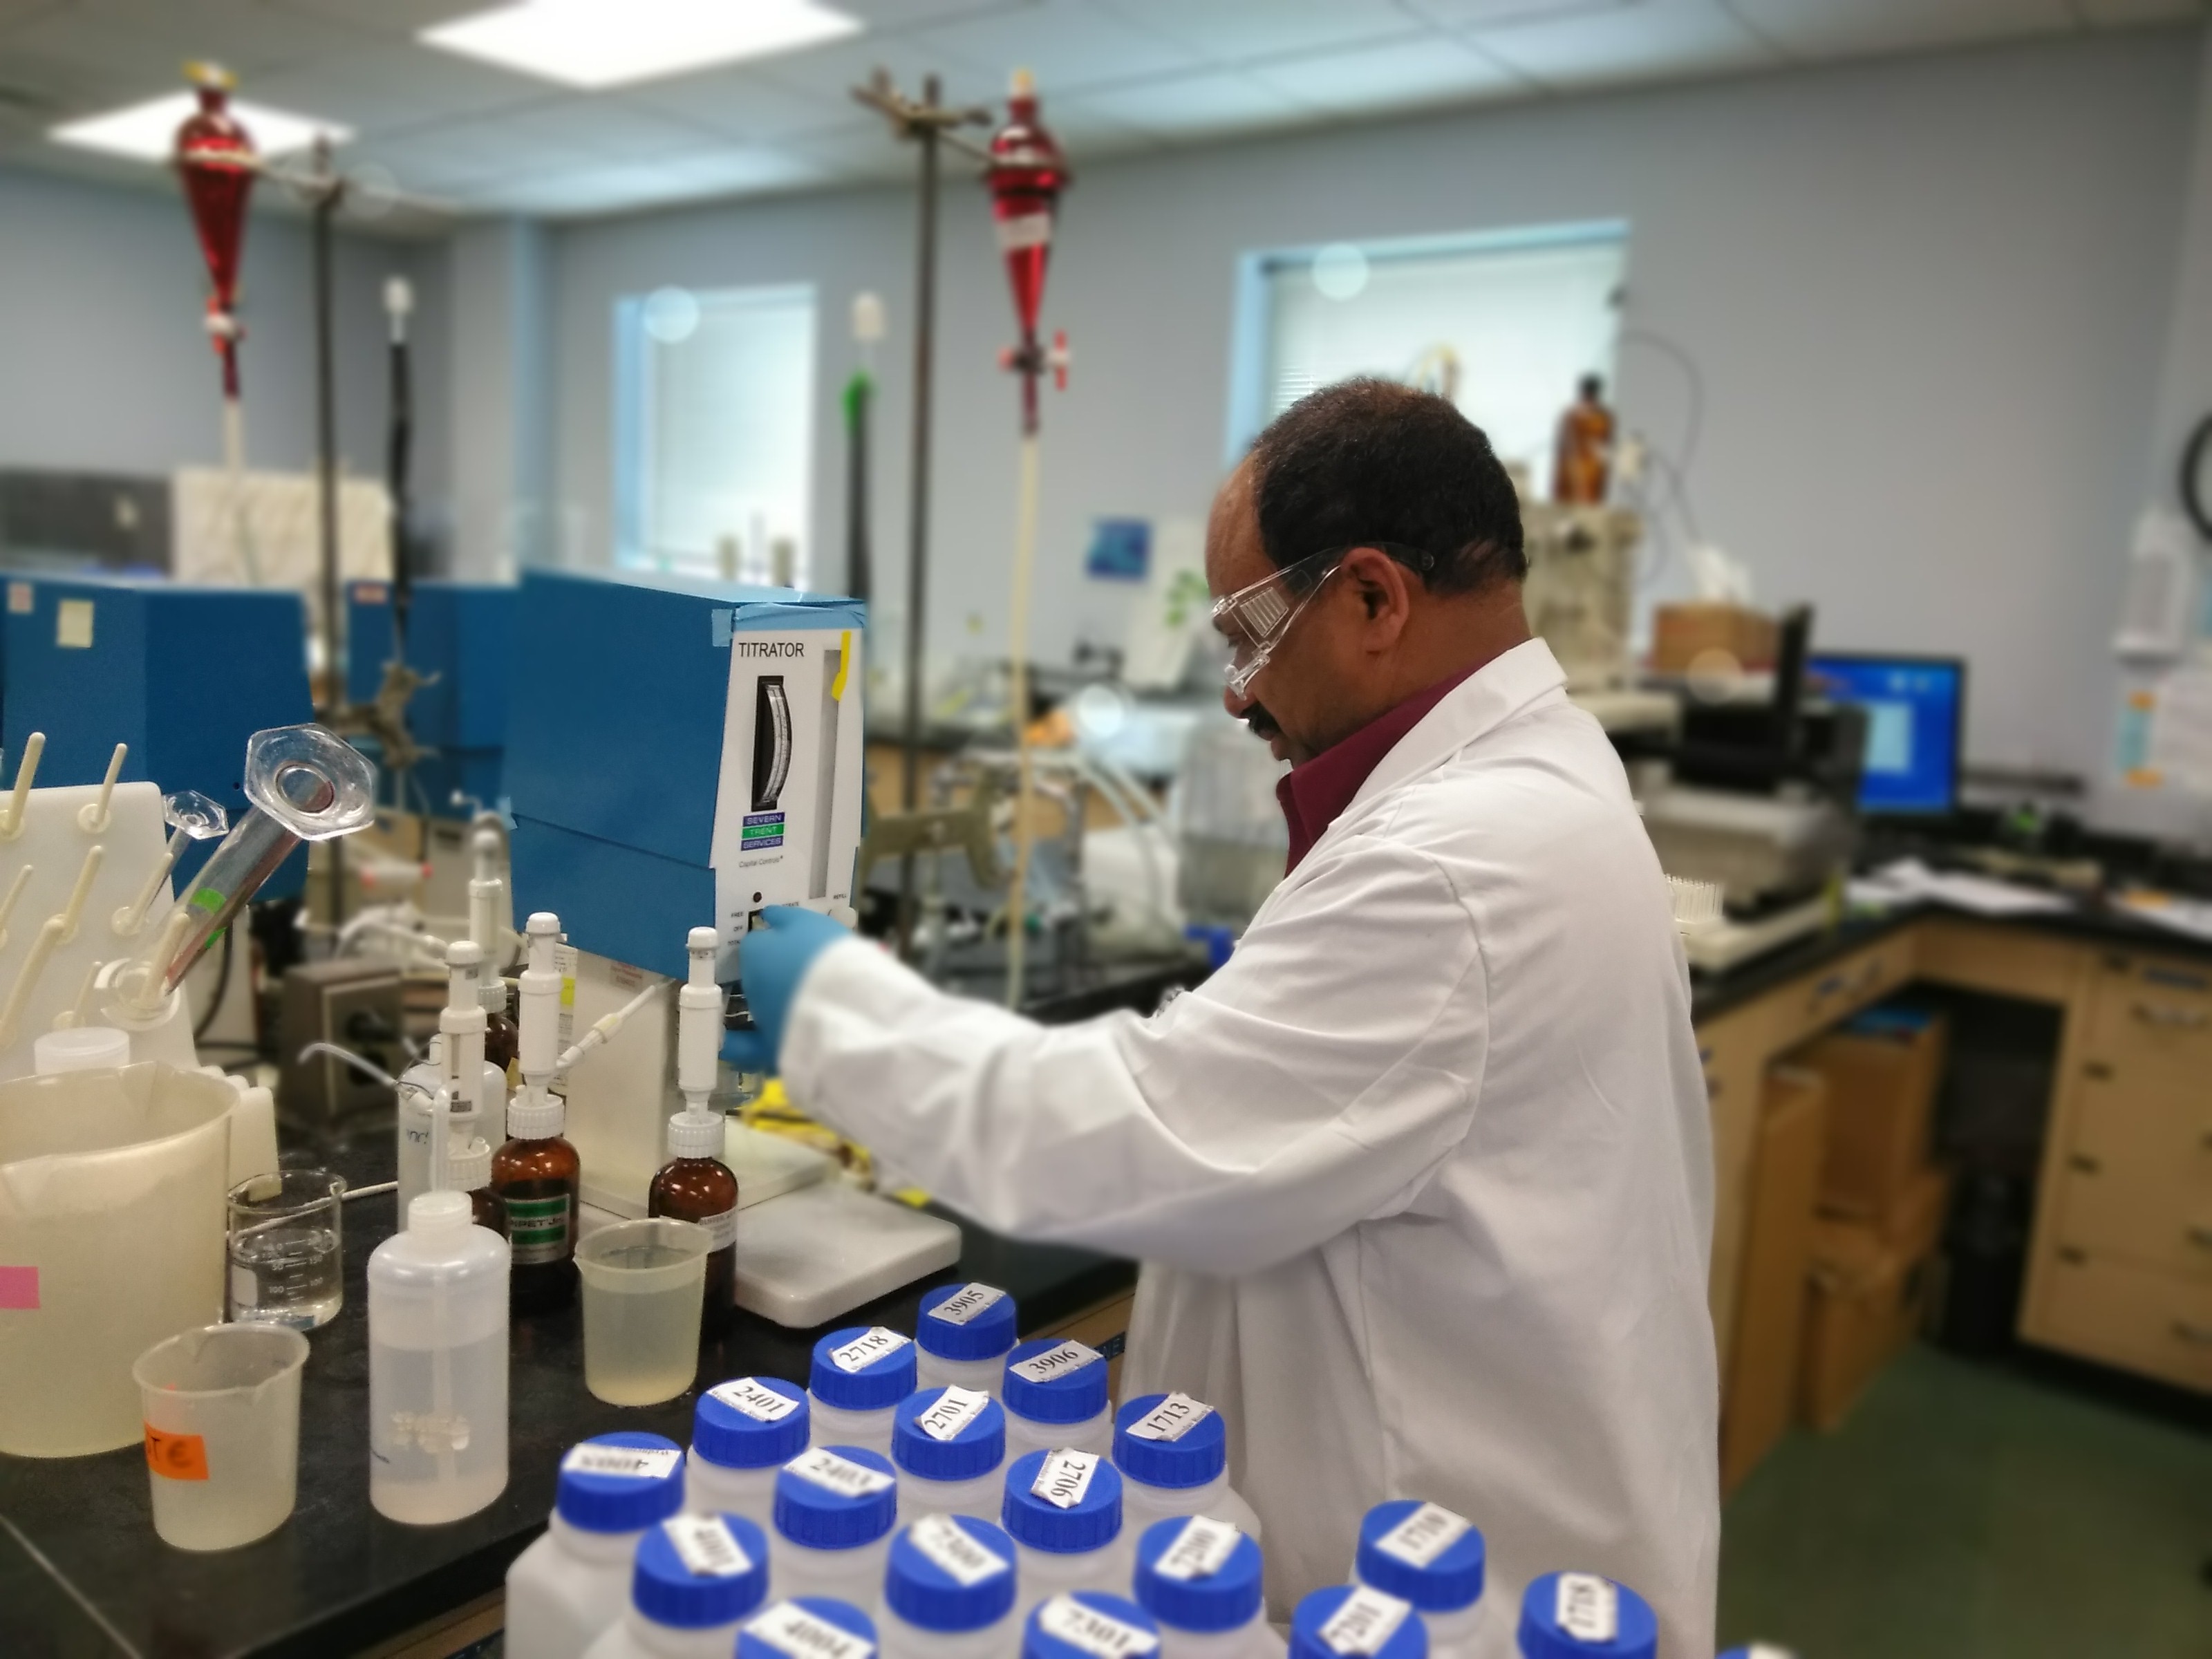 A photo of a scientist in a white lab coat, rubber gloves, and safety glasses uses a machine to test a water sample.